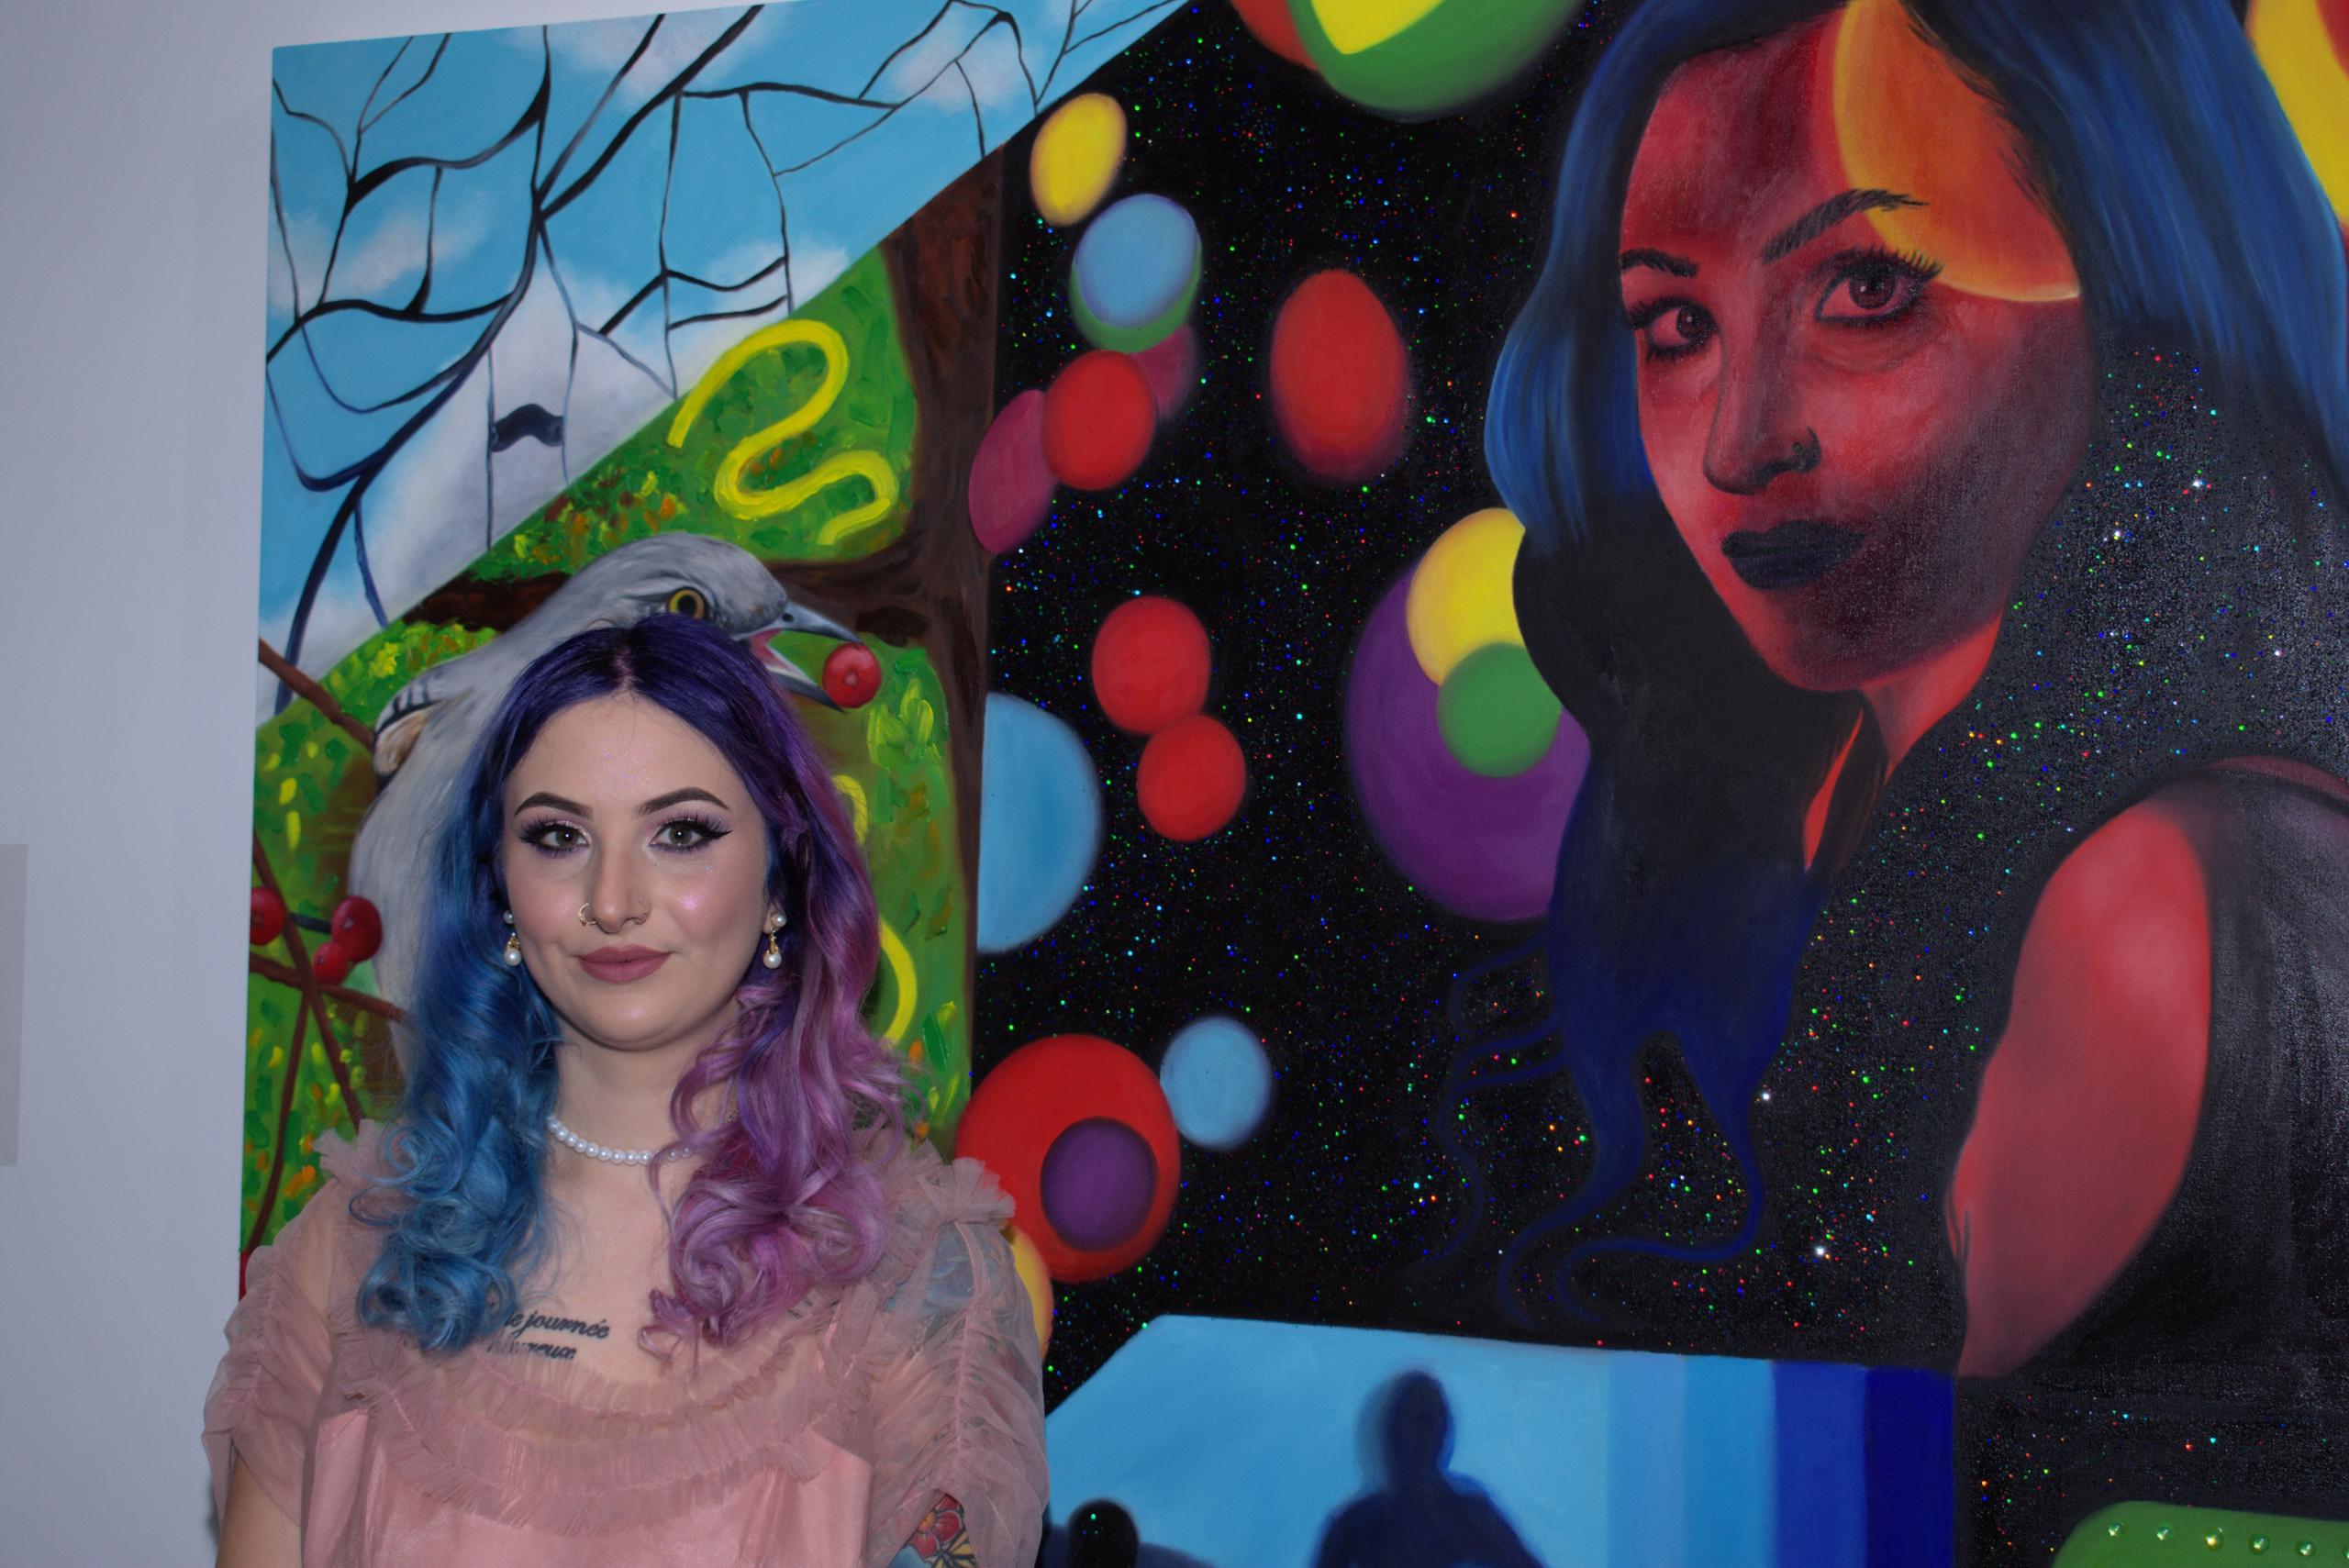 Arielle Tesoriero with her painting